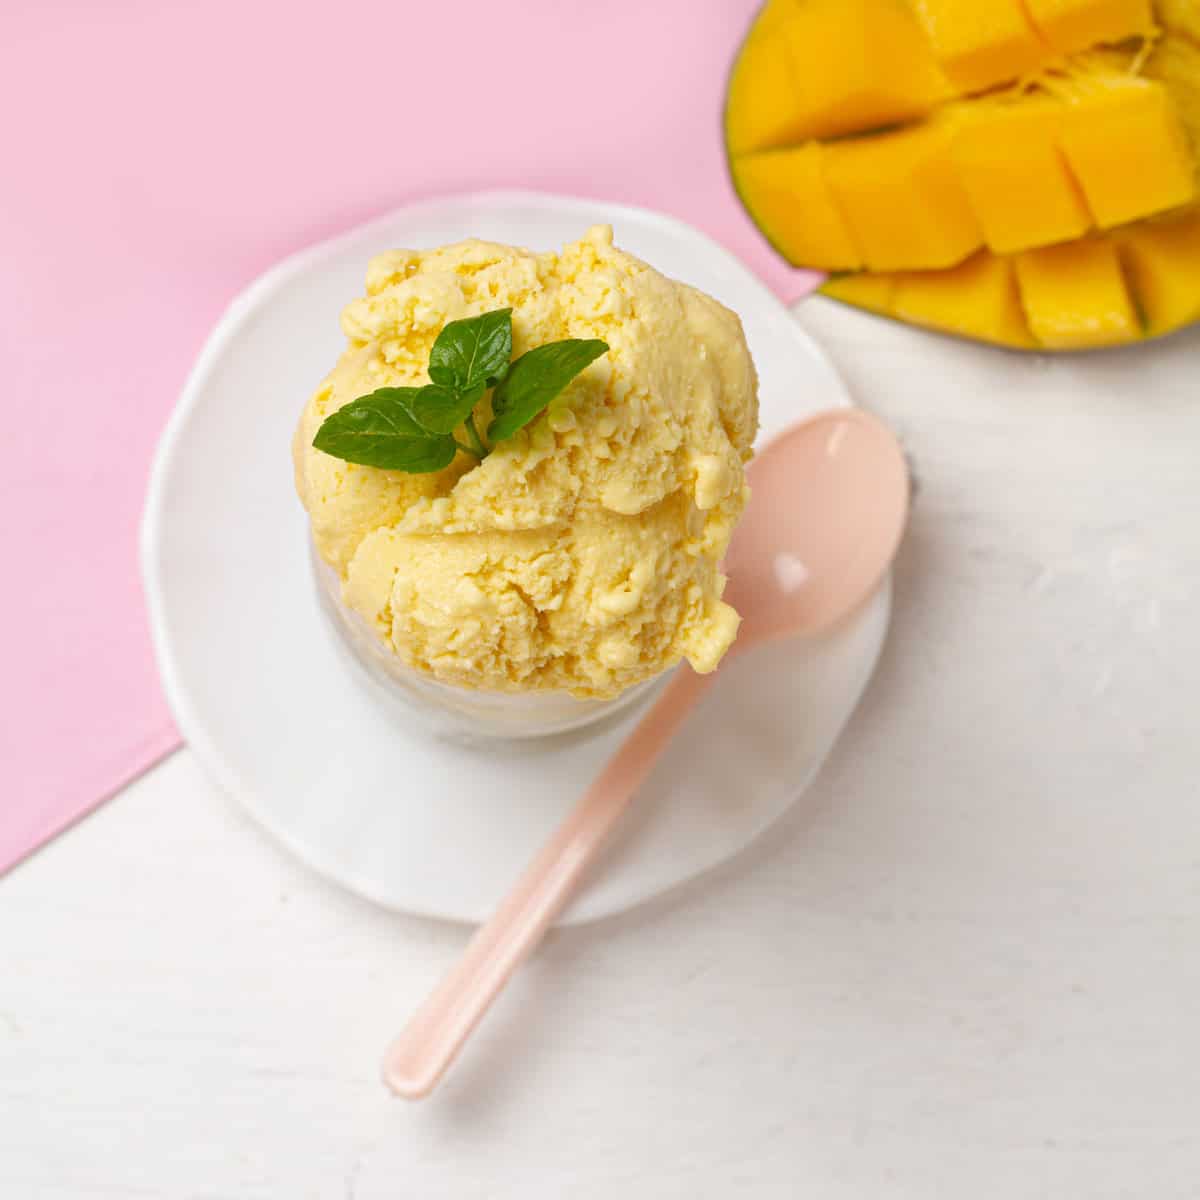 Creamy Mango and Coconut Ice Cream served in a bowl